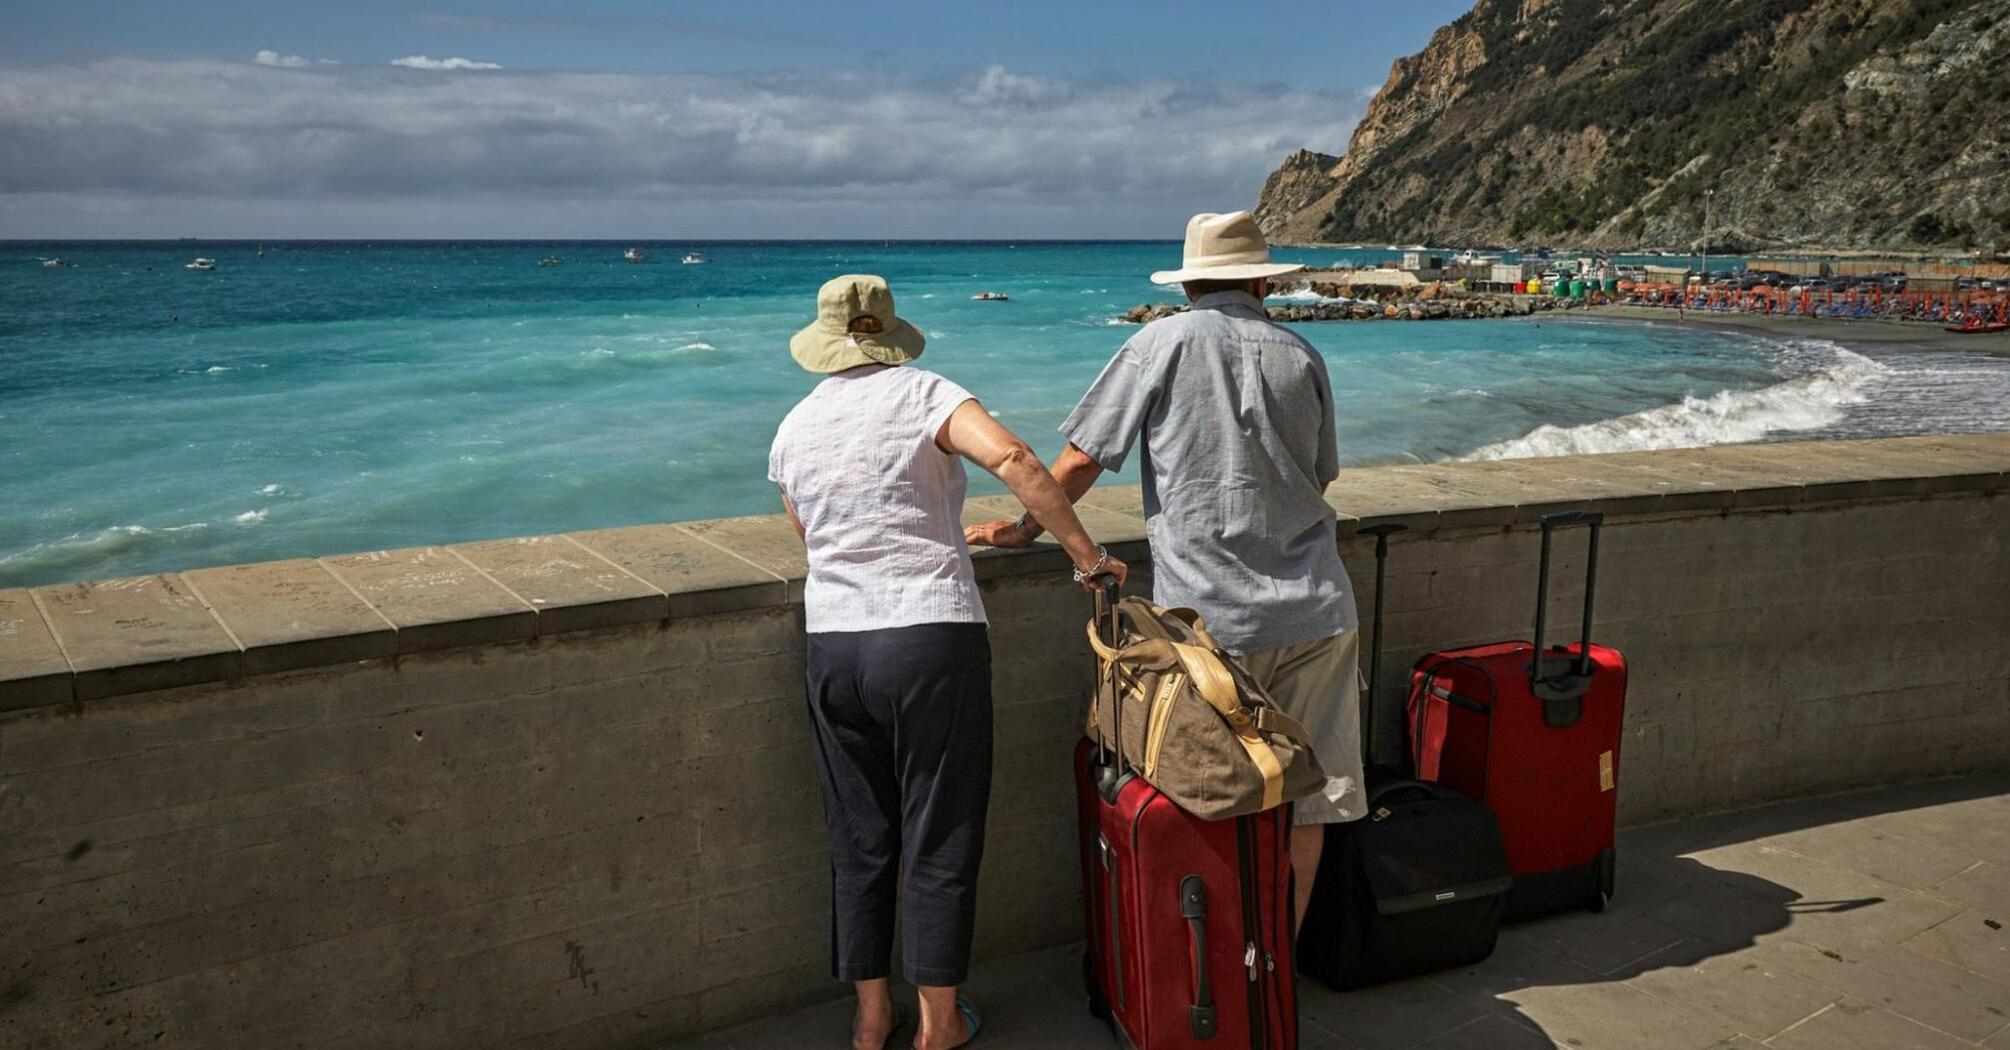 Two elderly travelers with suitcases looking at the beach